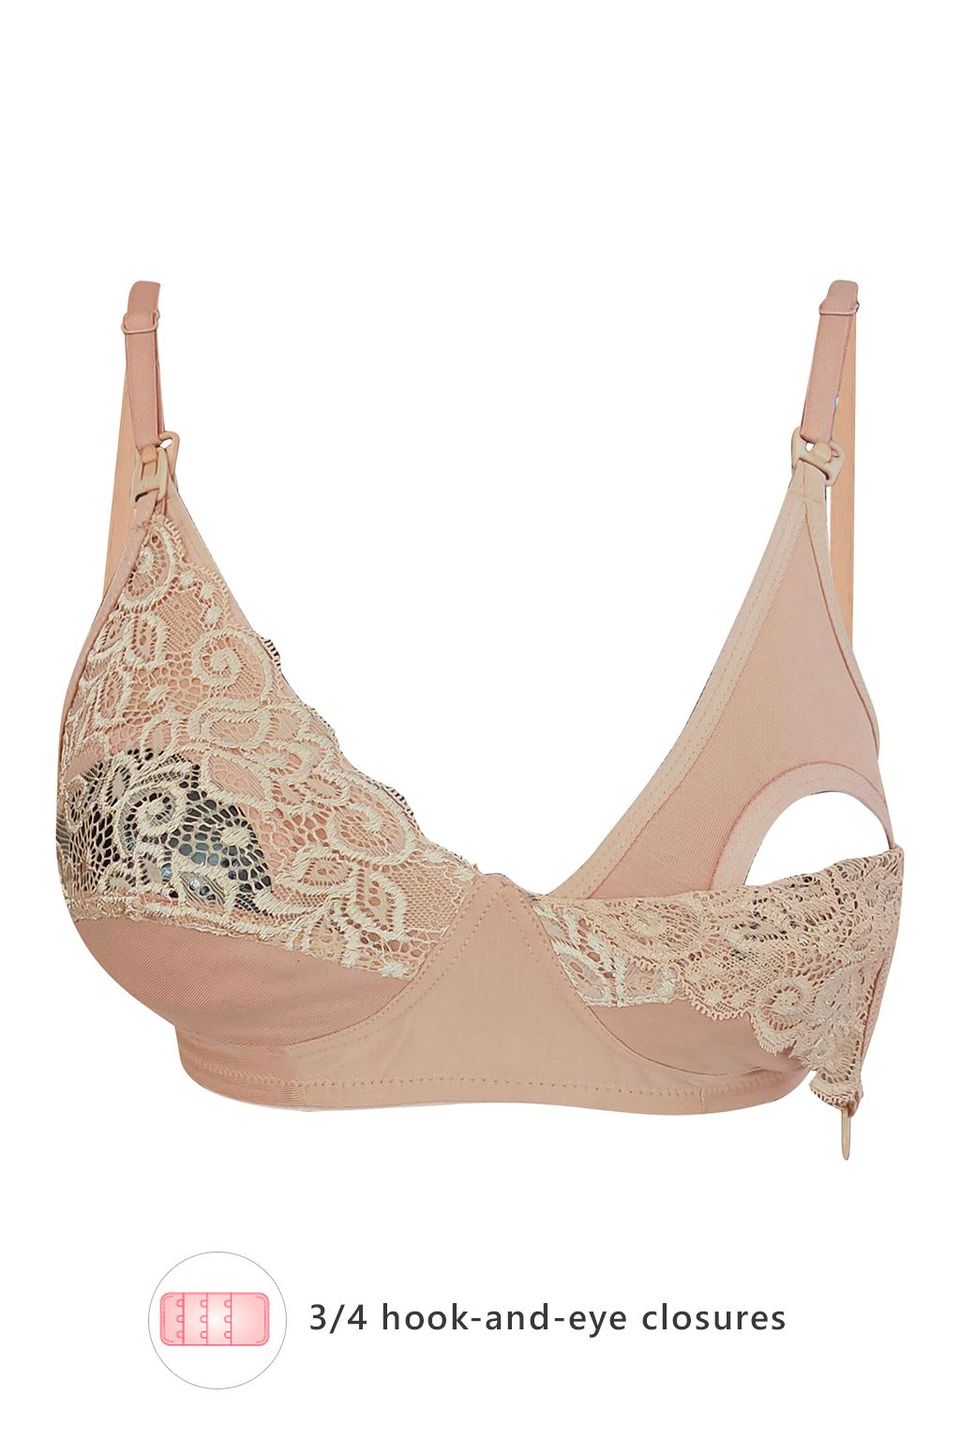 Clovia Non-Padded Non-Wired Full Cup Feeding Bra in Beige - Cotton & Lace